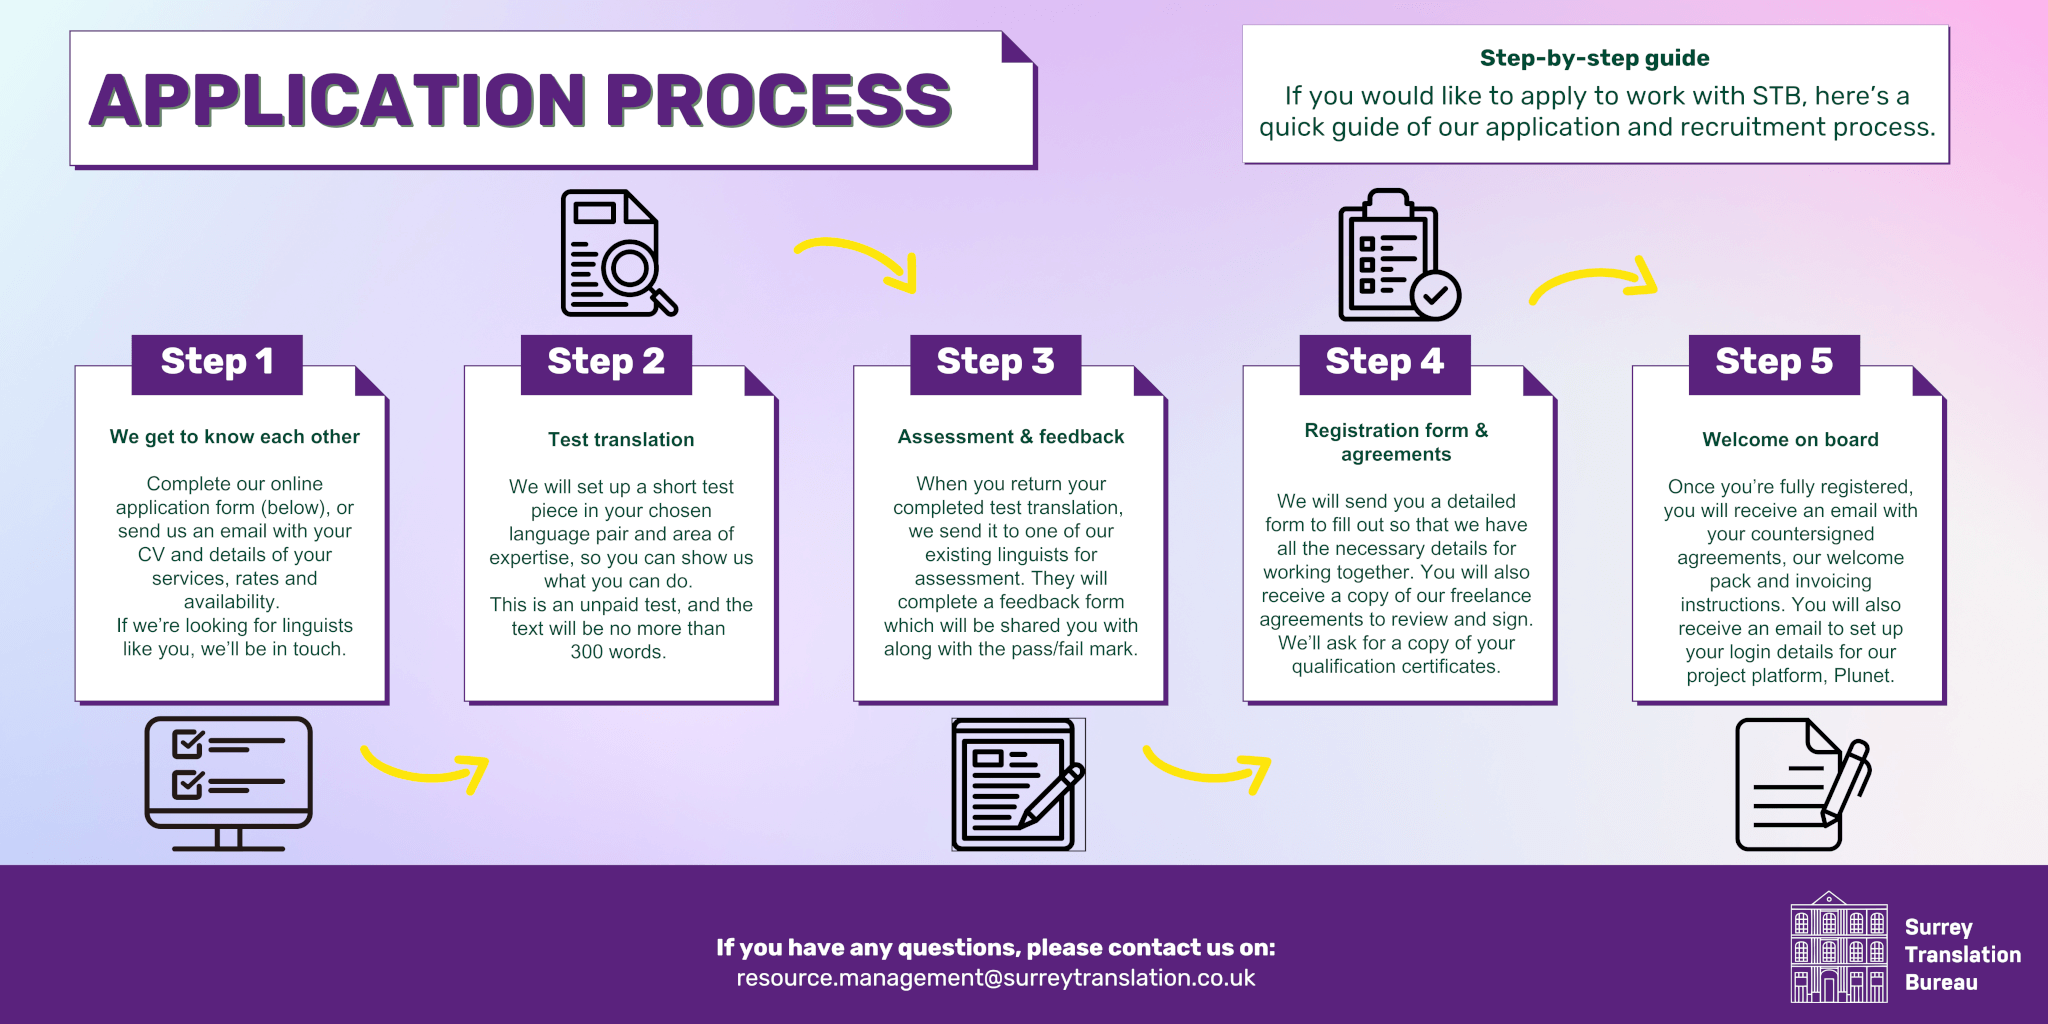 infographic of the 5 step process to apply and register to work with Surrey Translation Bureau